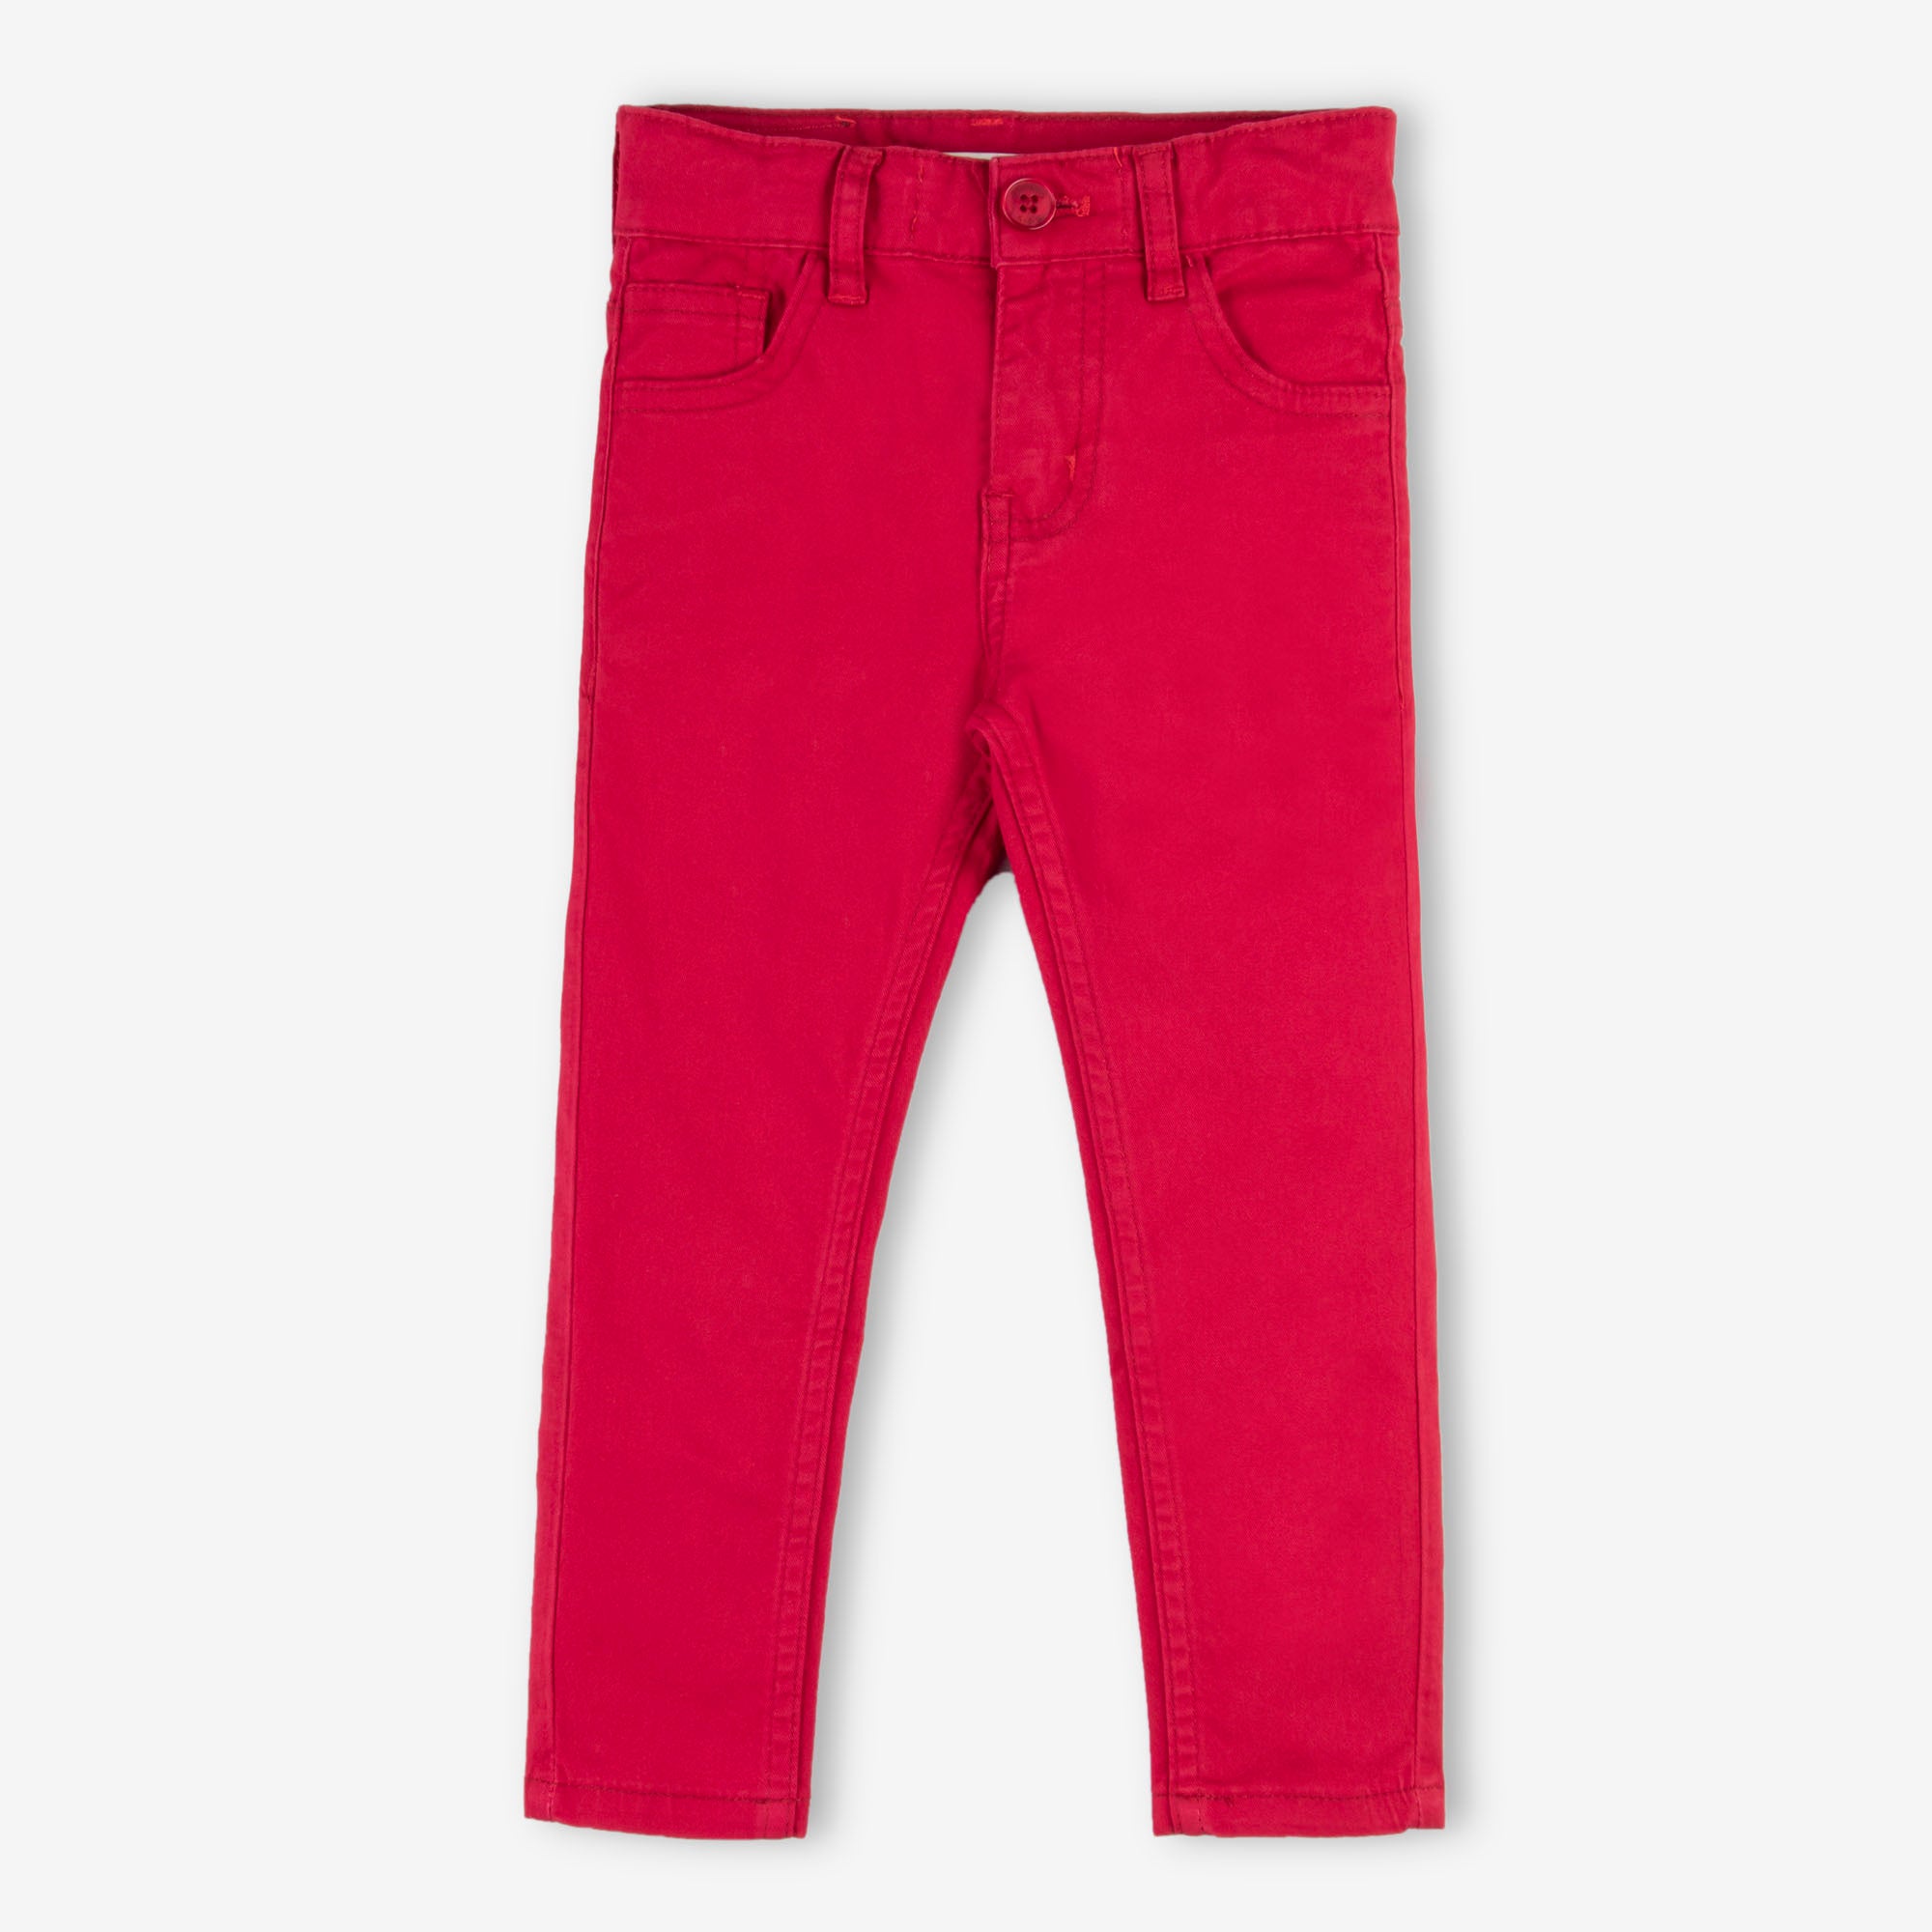 Bright Red Pants